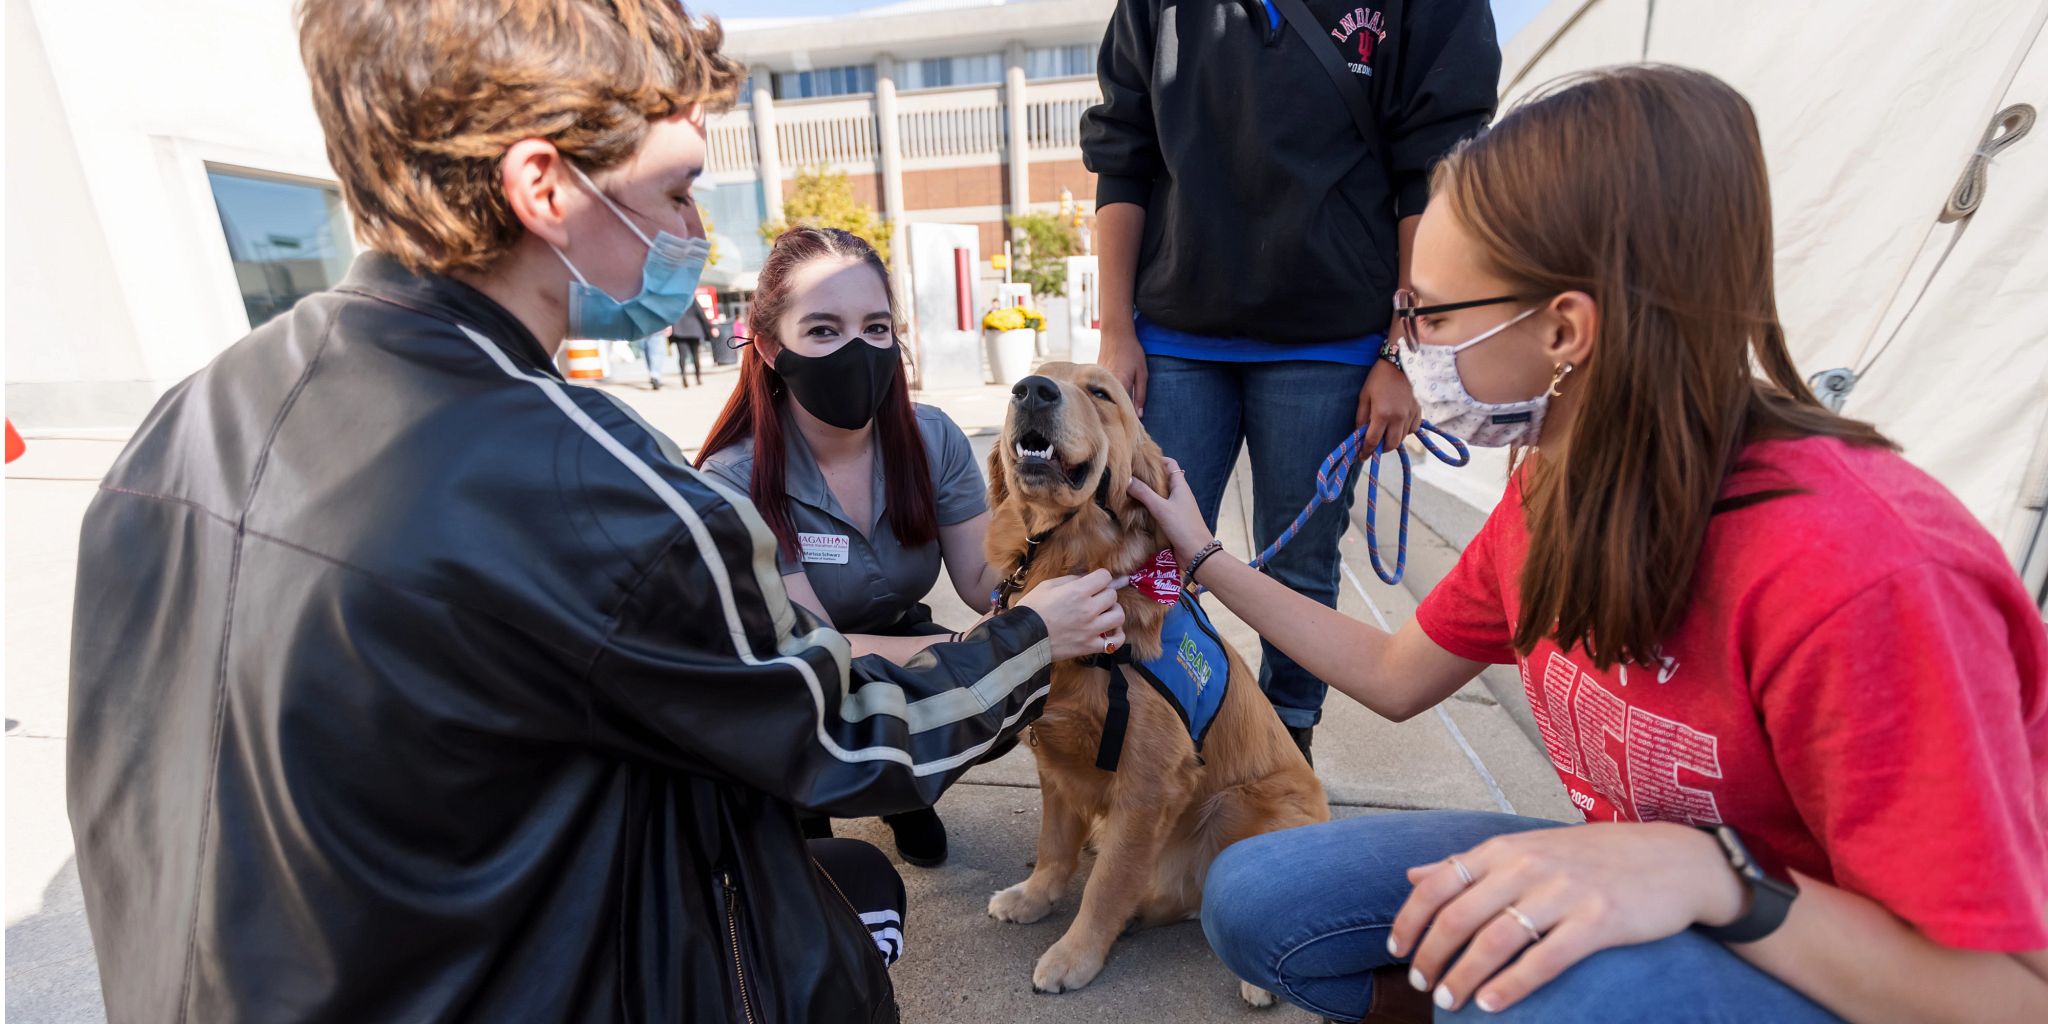 Students petting a dog